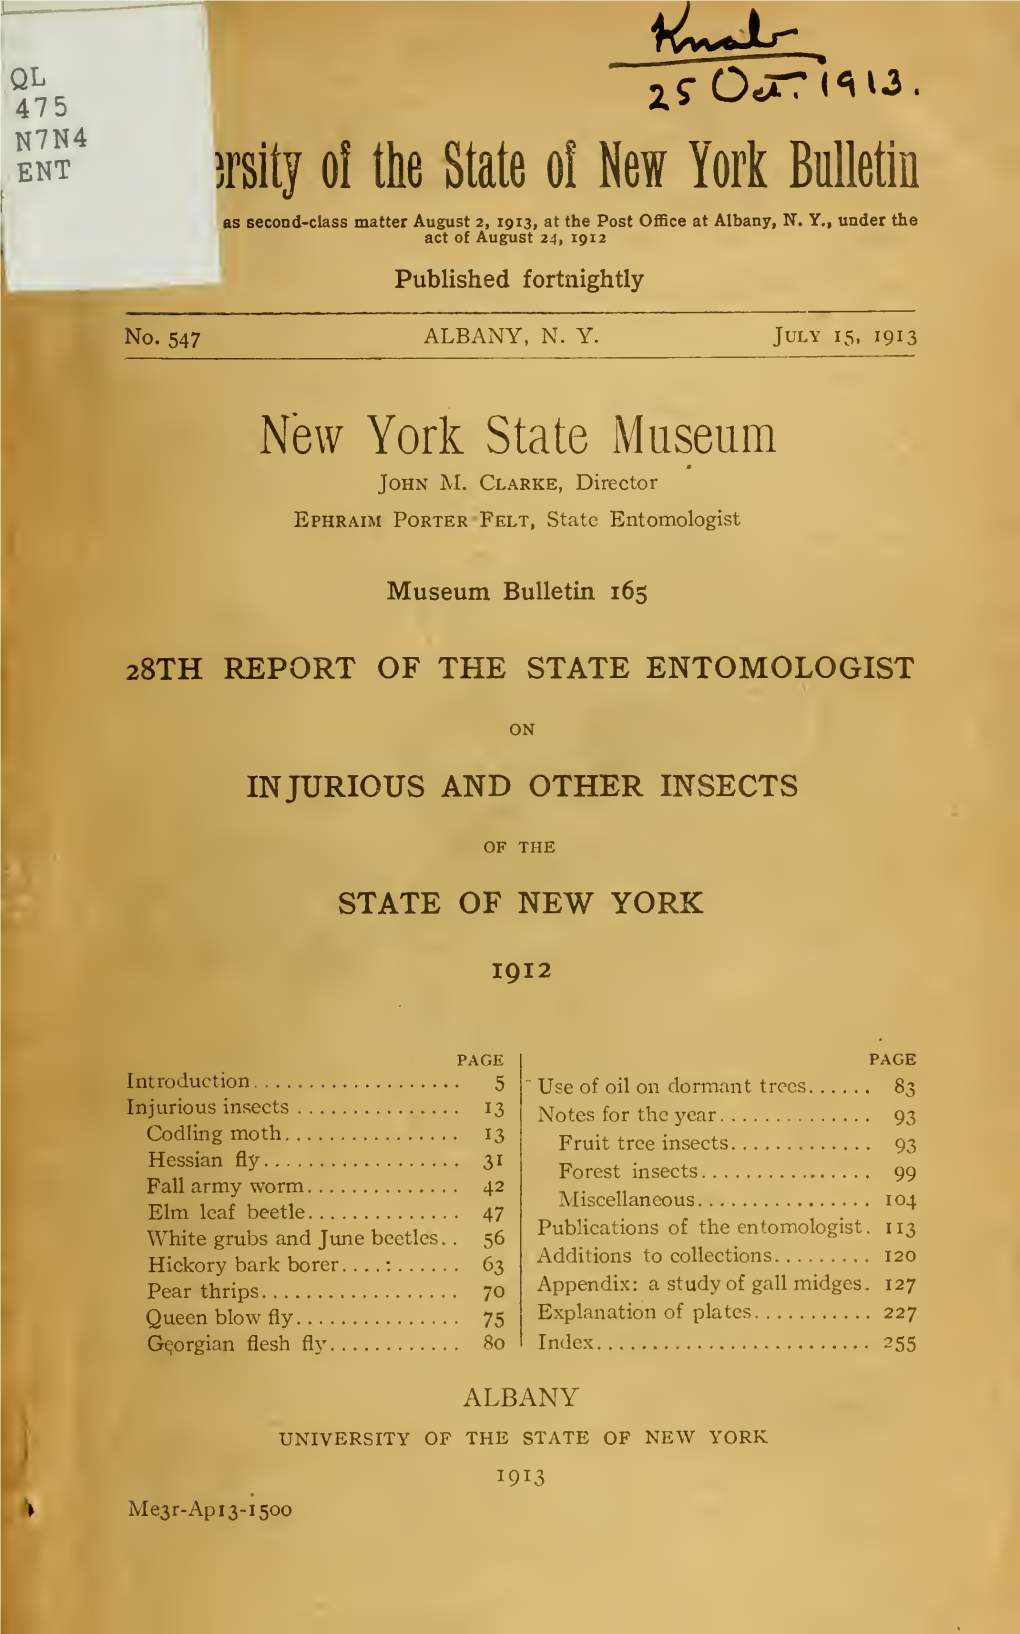 Report of the State Entomologist on Injurious and Other Insects of The